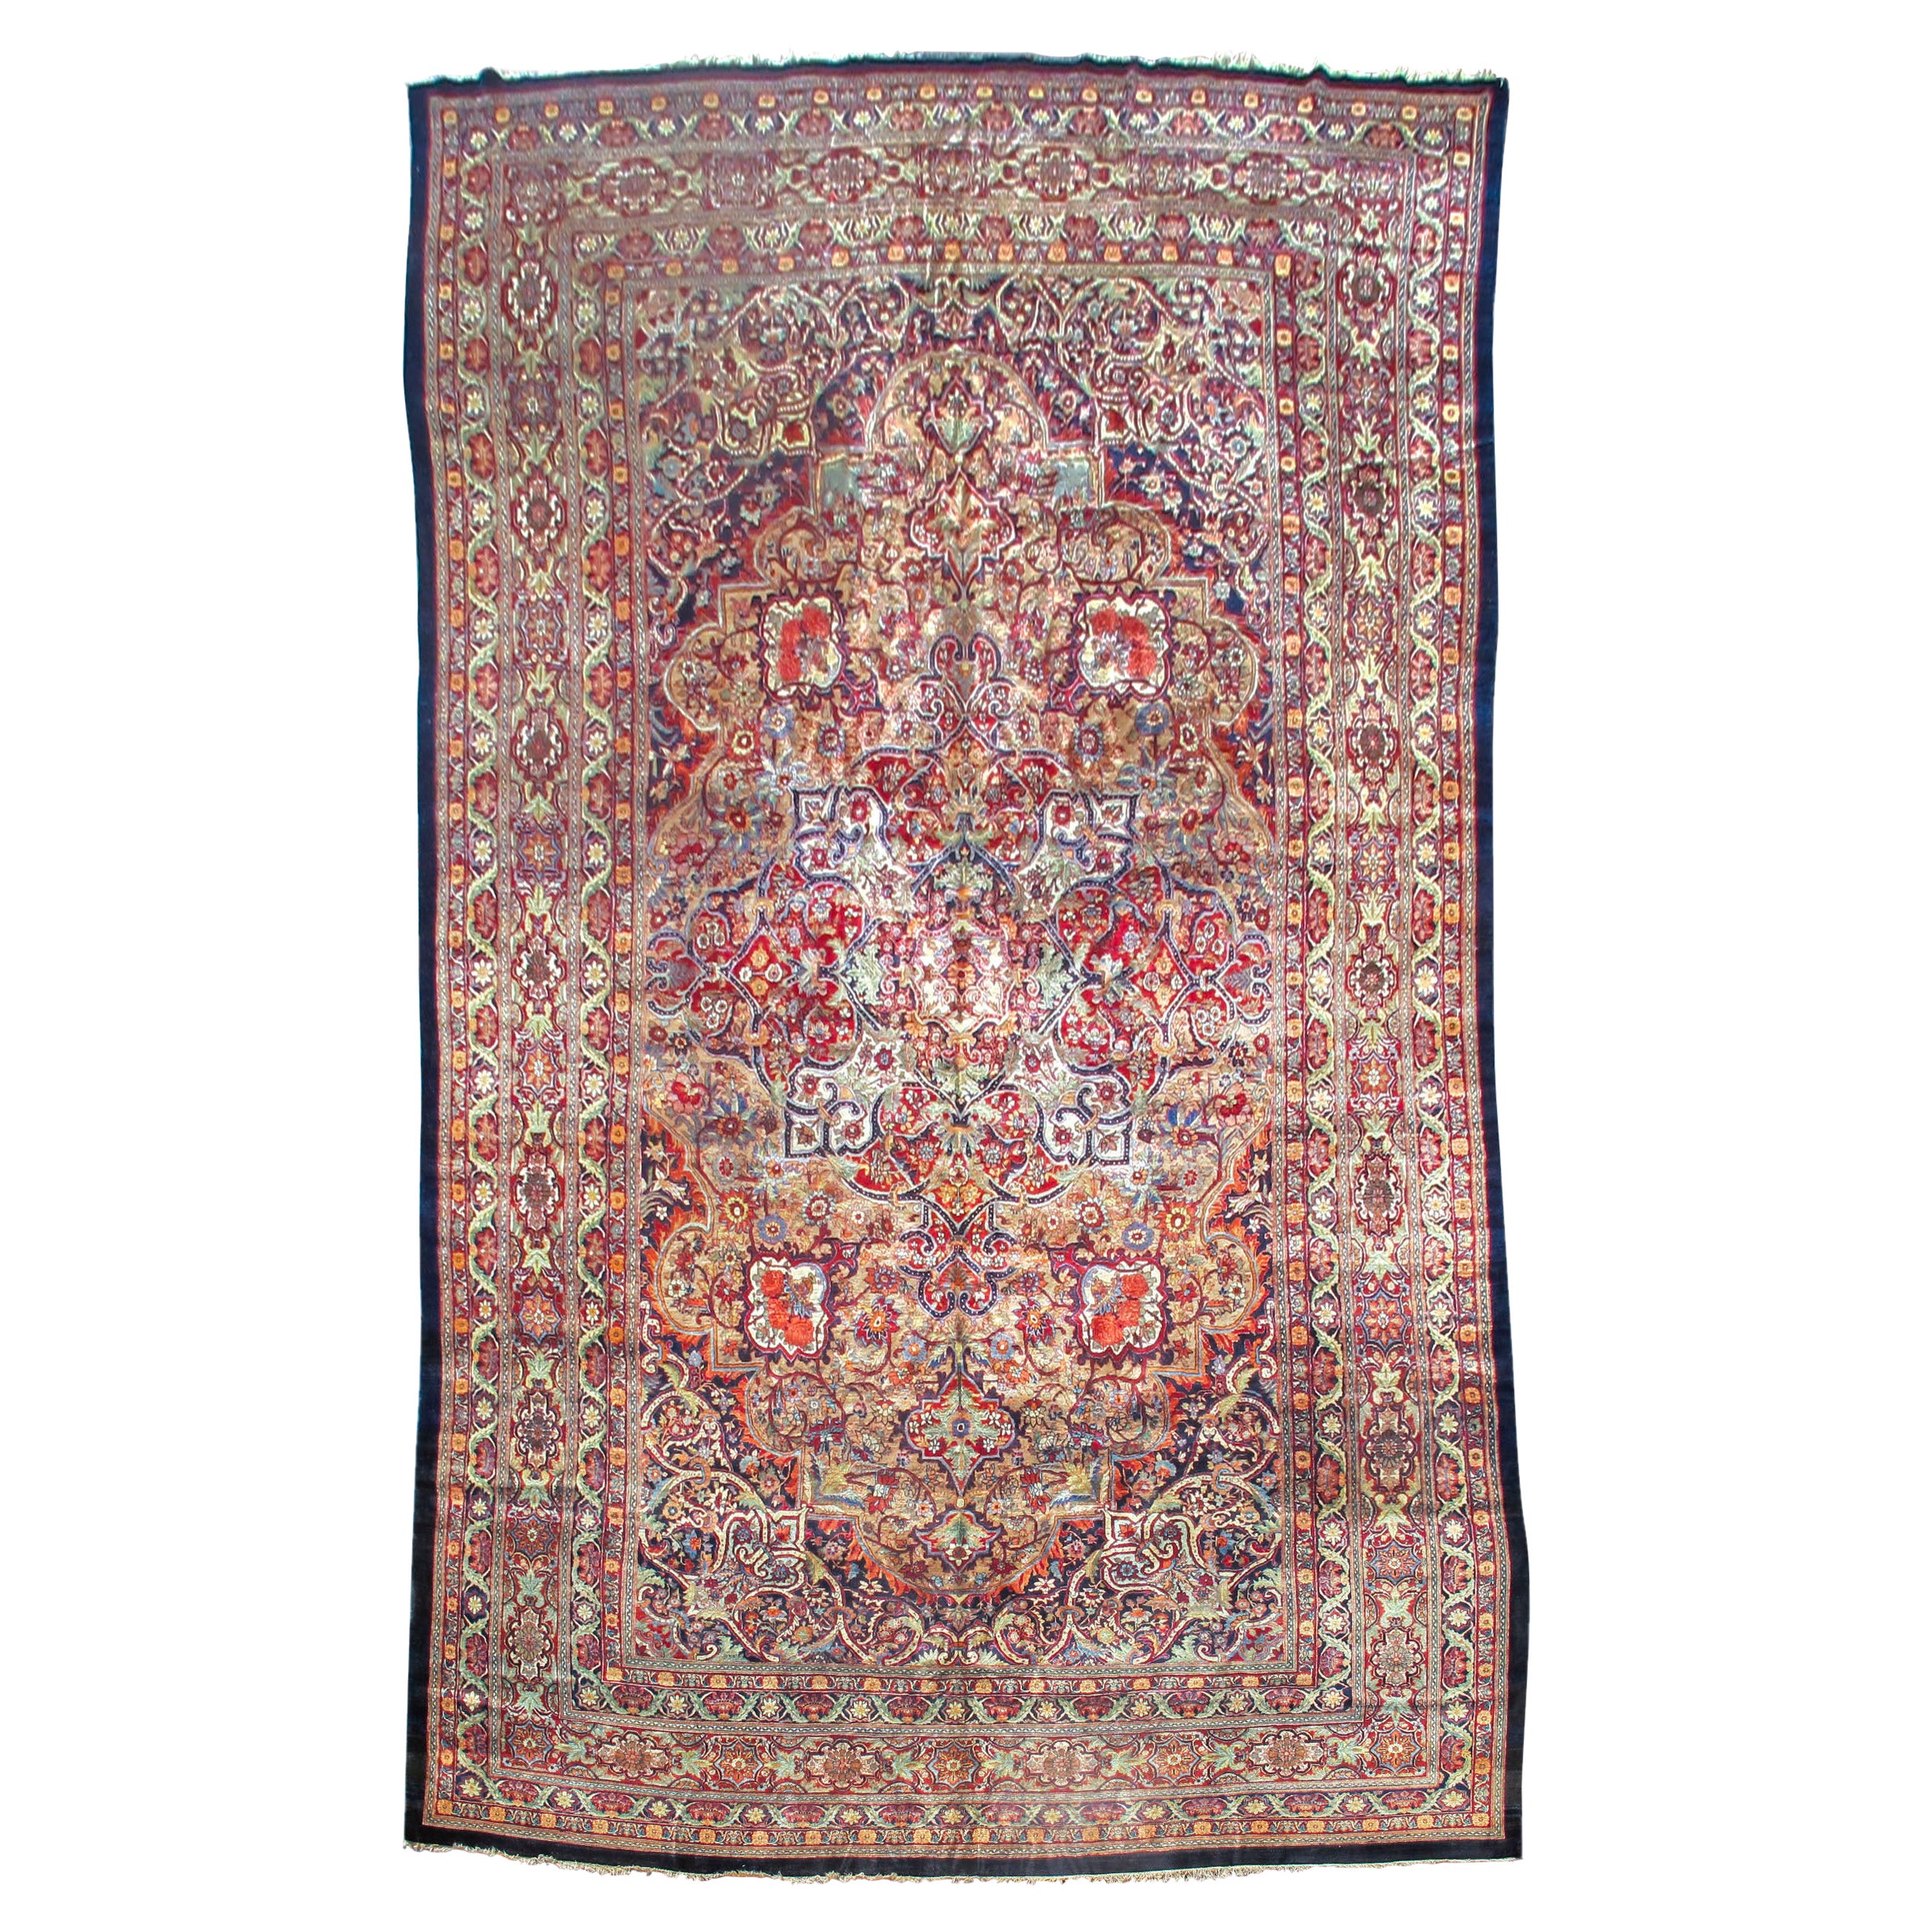 Antique Large Oversized Northeast Persian Carpet, Early 20th Century